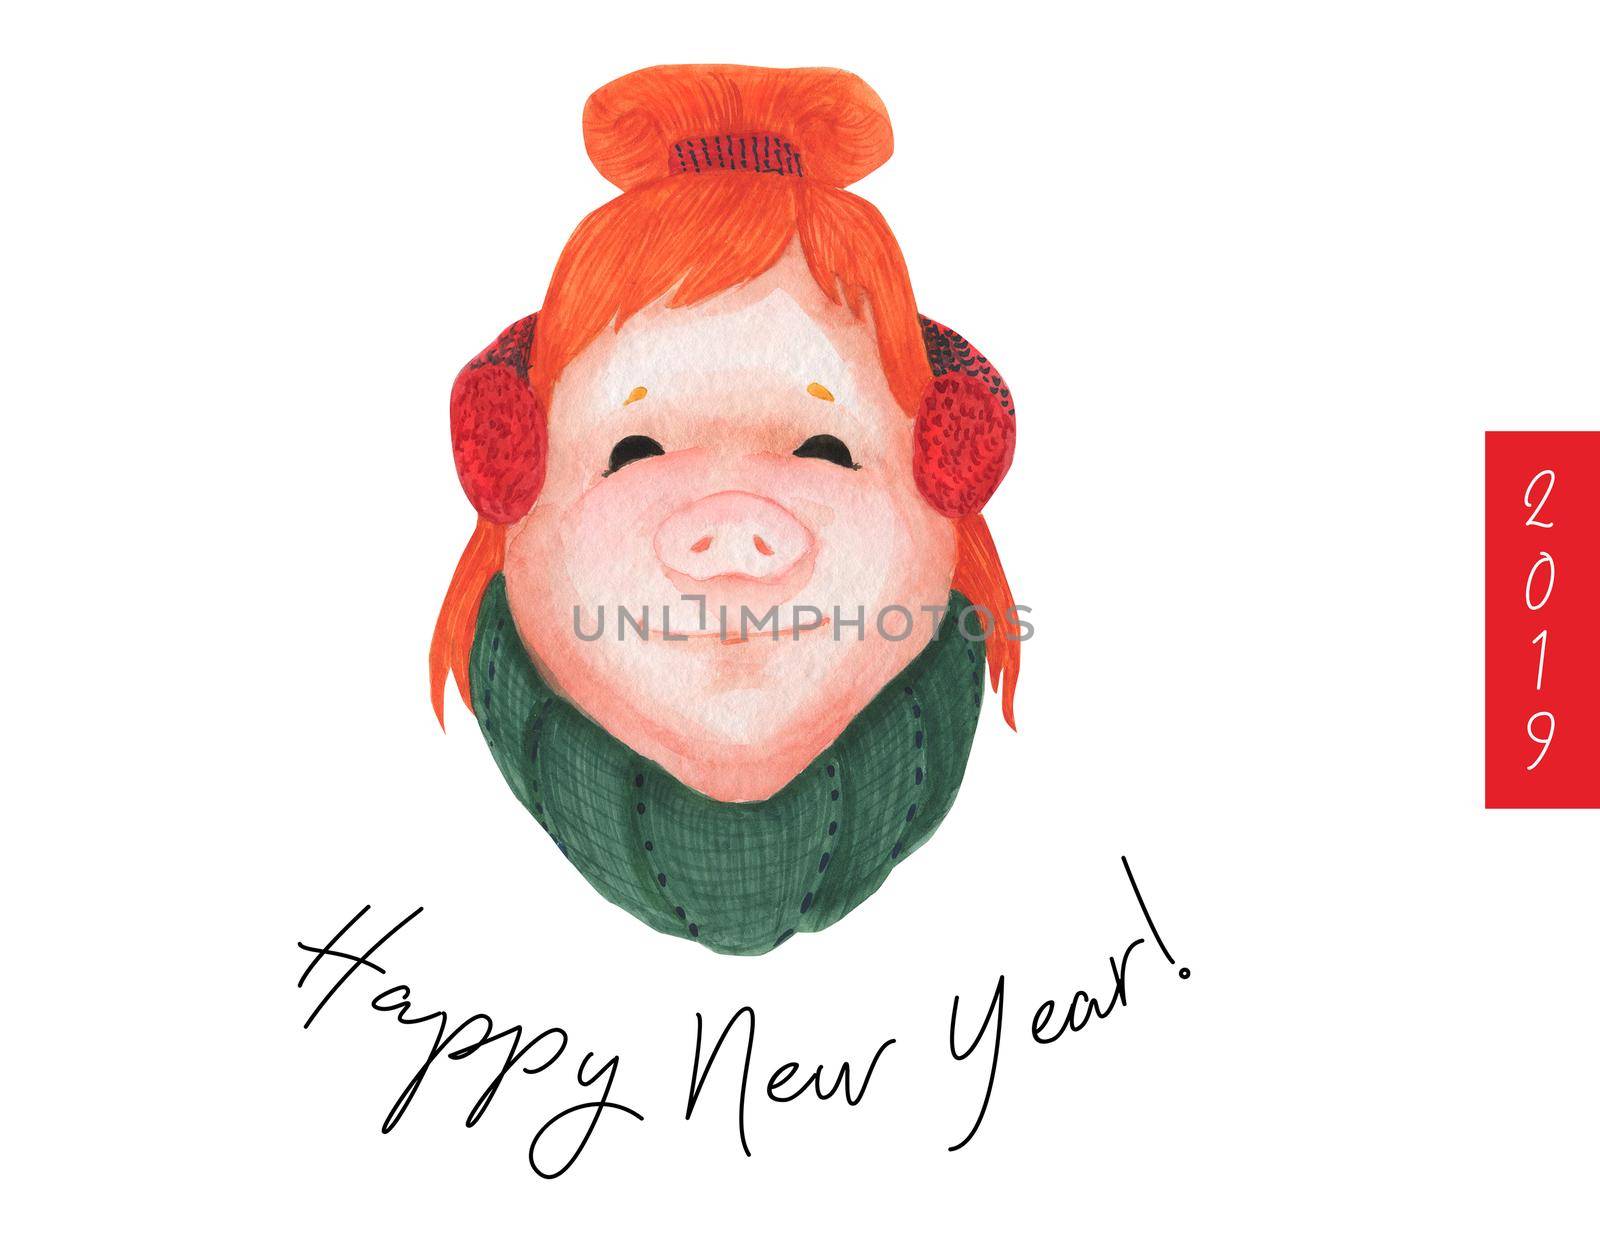 Happy New Year postcard Girl Teen Piggy 2019. Watercolor art, clipping path included